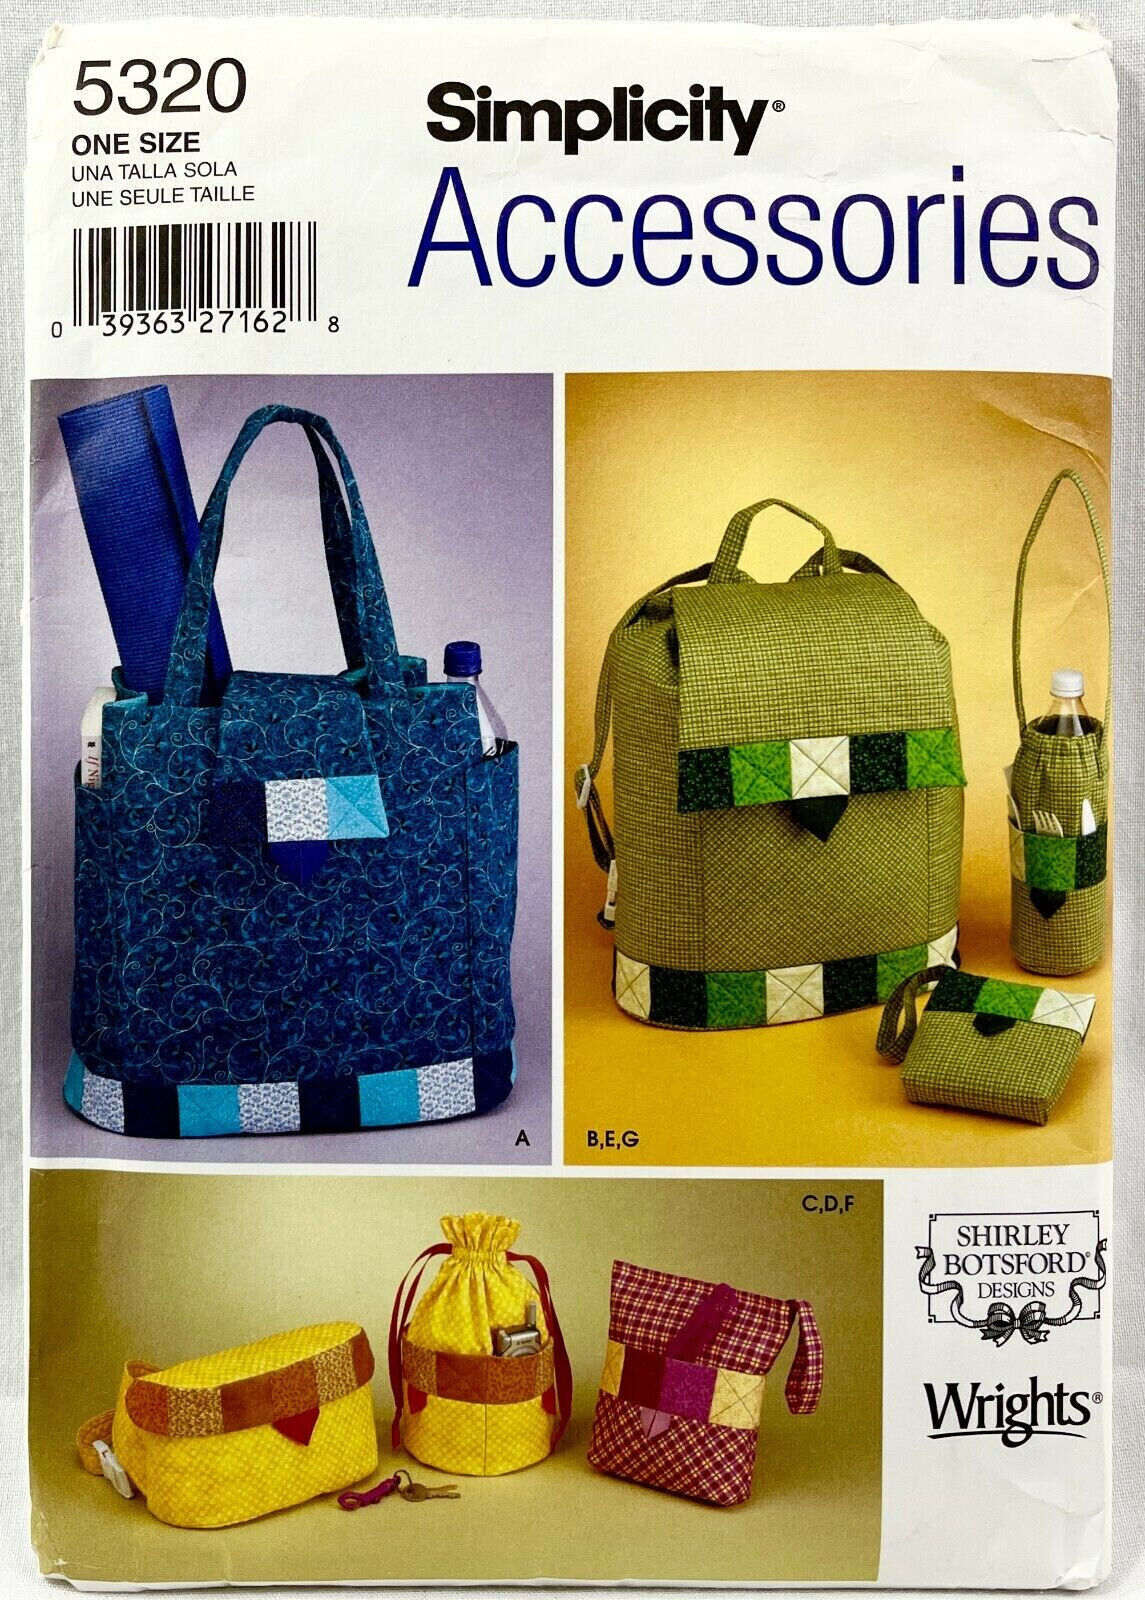 2003 Simplicity Sewing Pattern 5320 Accessories Bags Fat Quarters 7 Design 11089